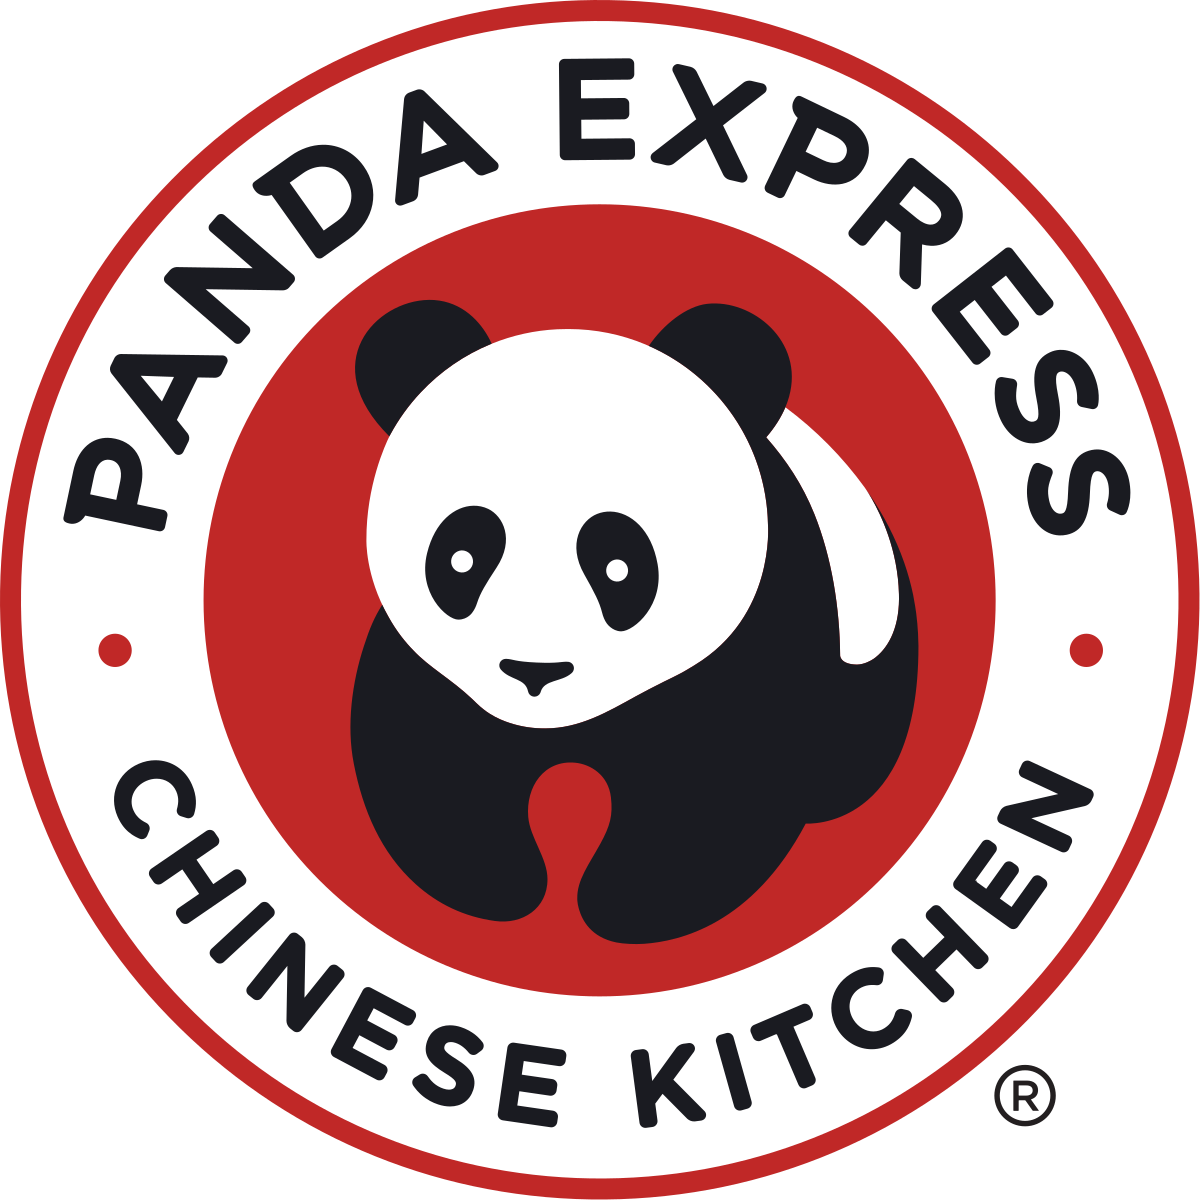 Panda Express $5 Plate Select California and Nevada Locations Only